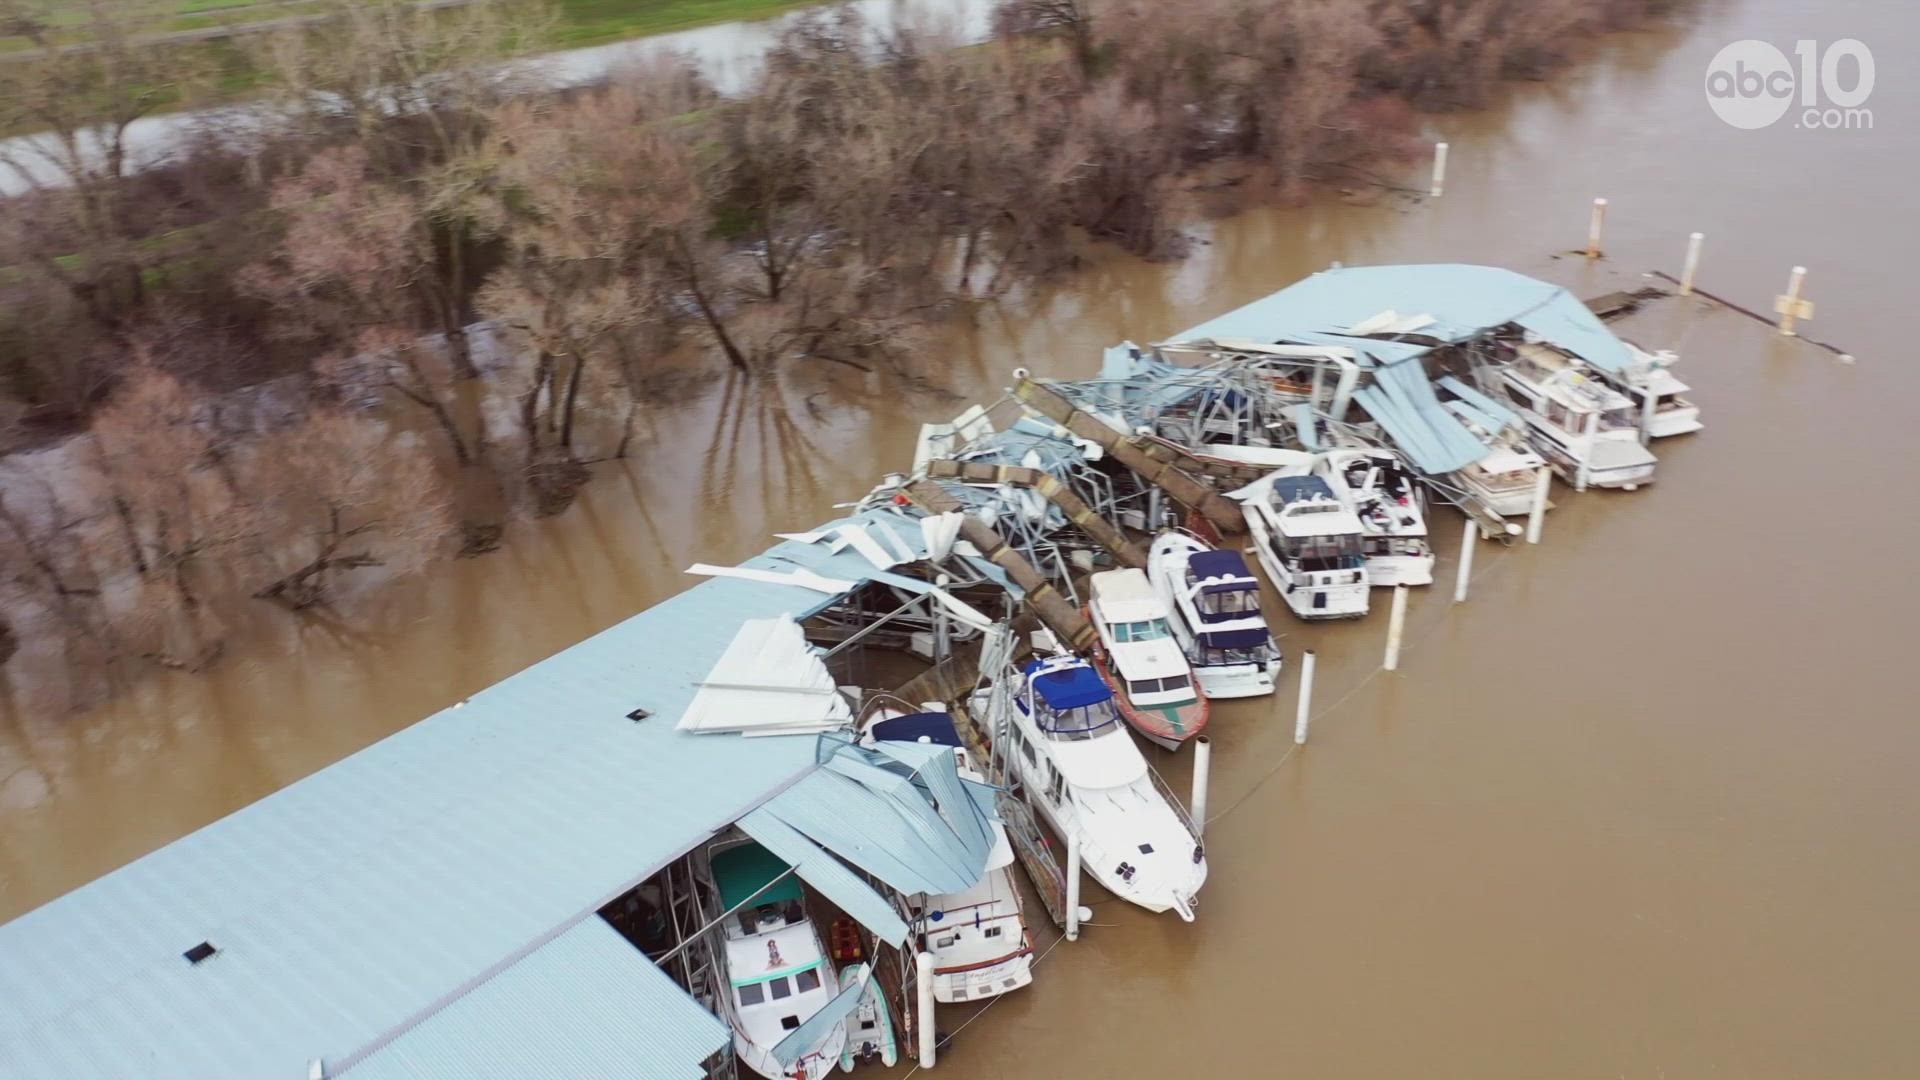 The Sacramento Yacht Club in West Sacramento took a brunt of damage to its dock after the Northern California storm took its toll.